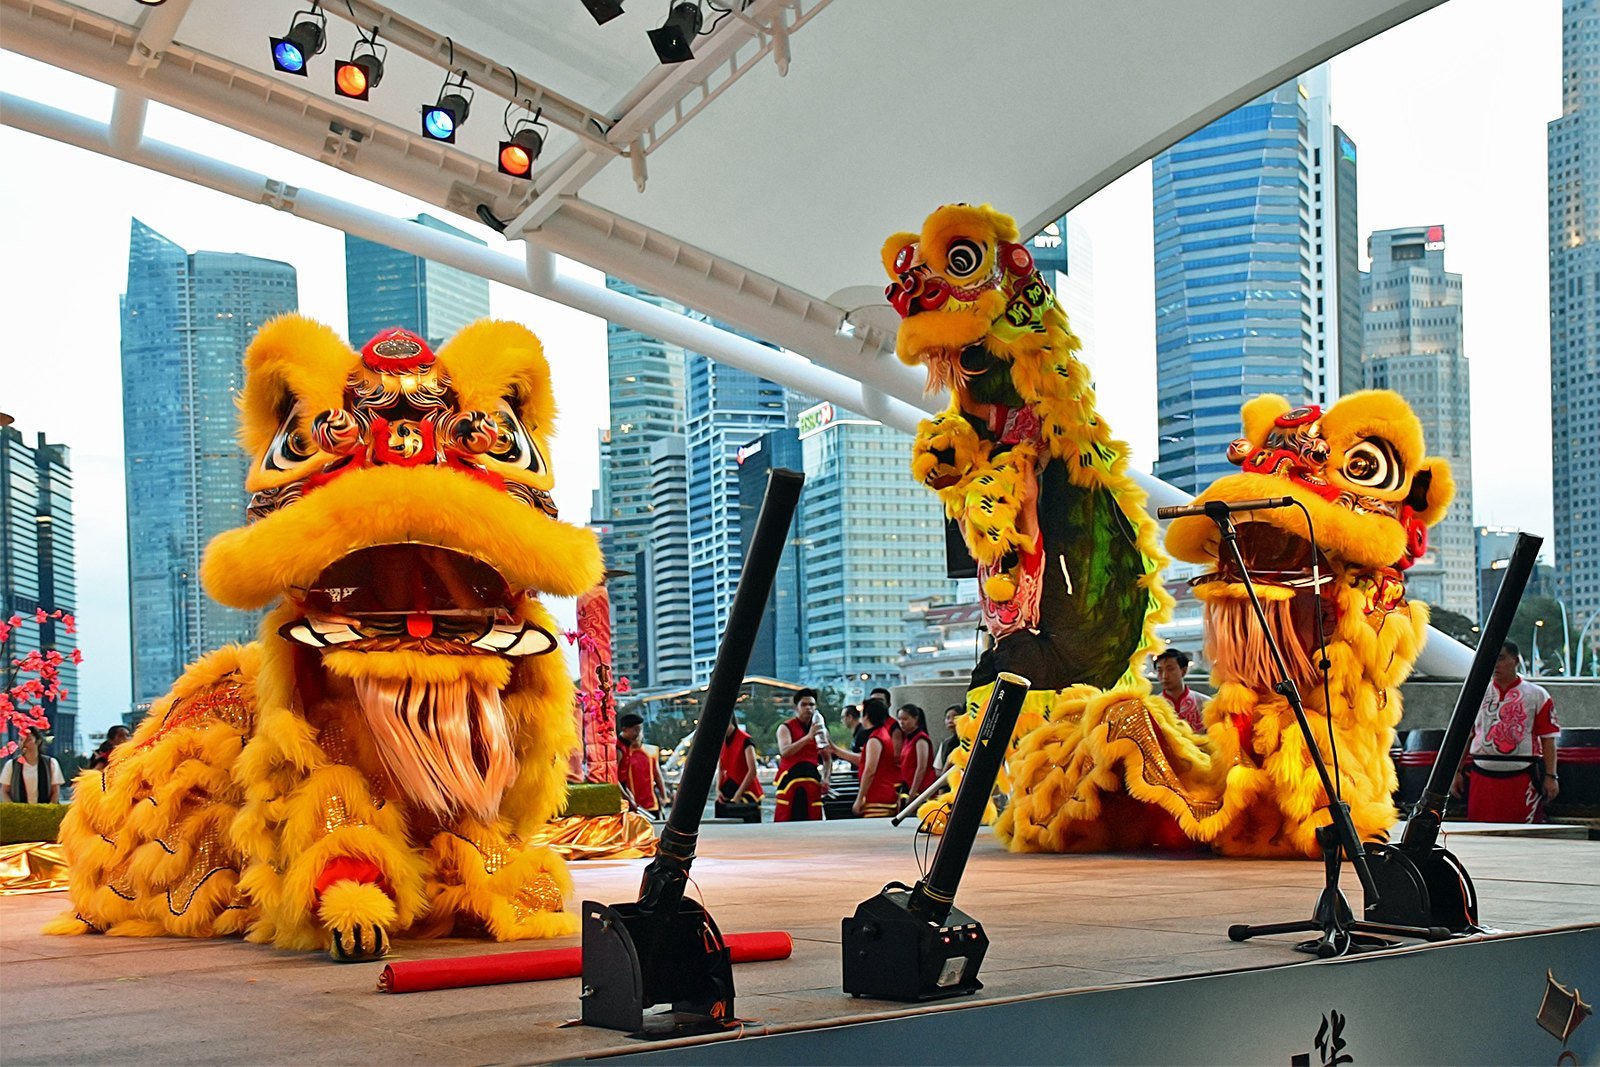 Lion dance not allowed at kopitiams, homes & markets for CNY 2021 to prevent crowding